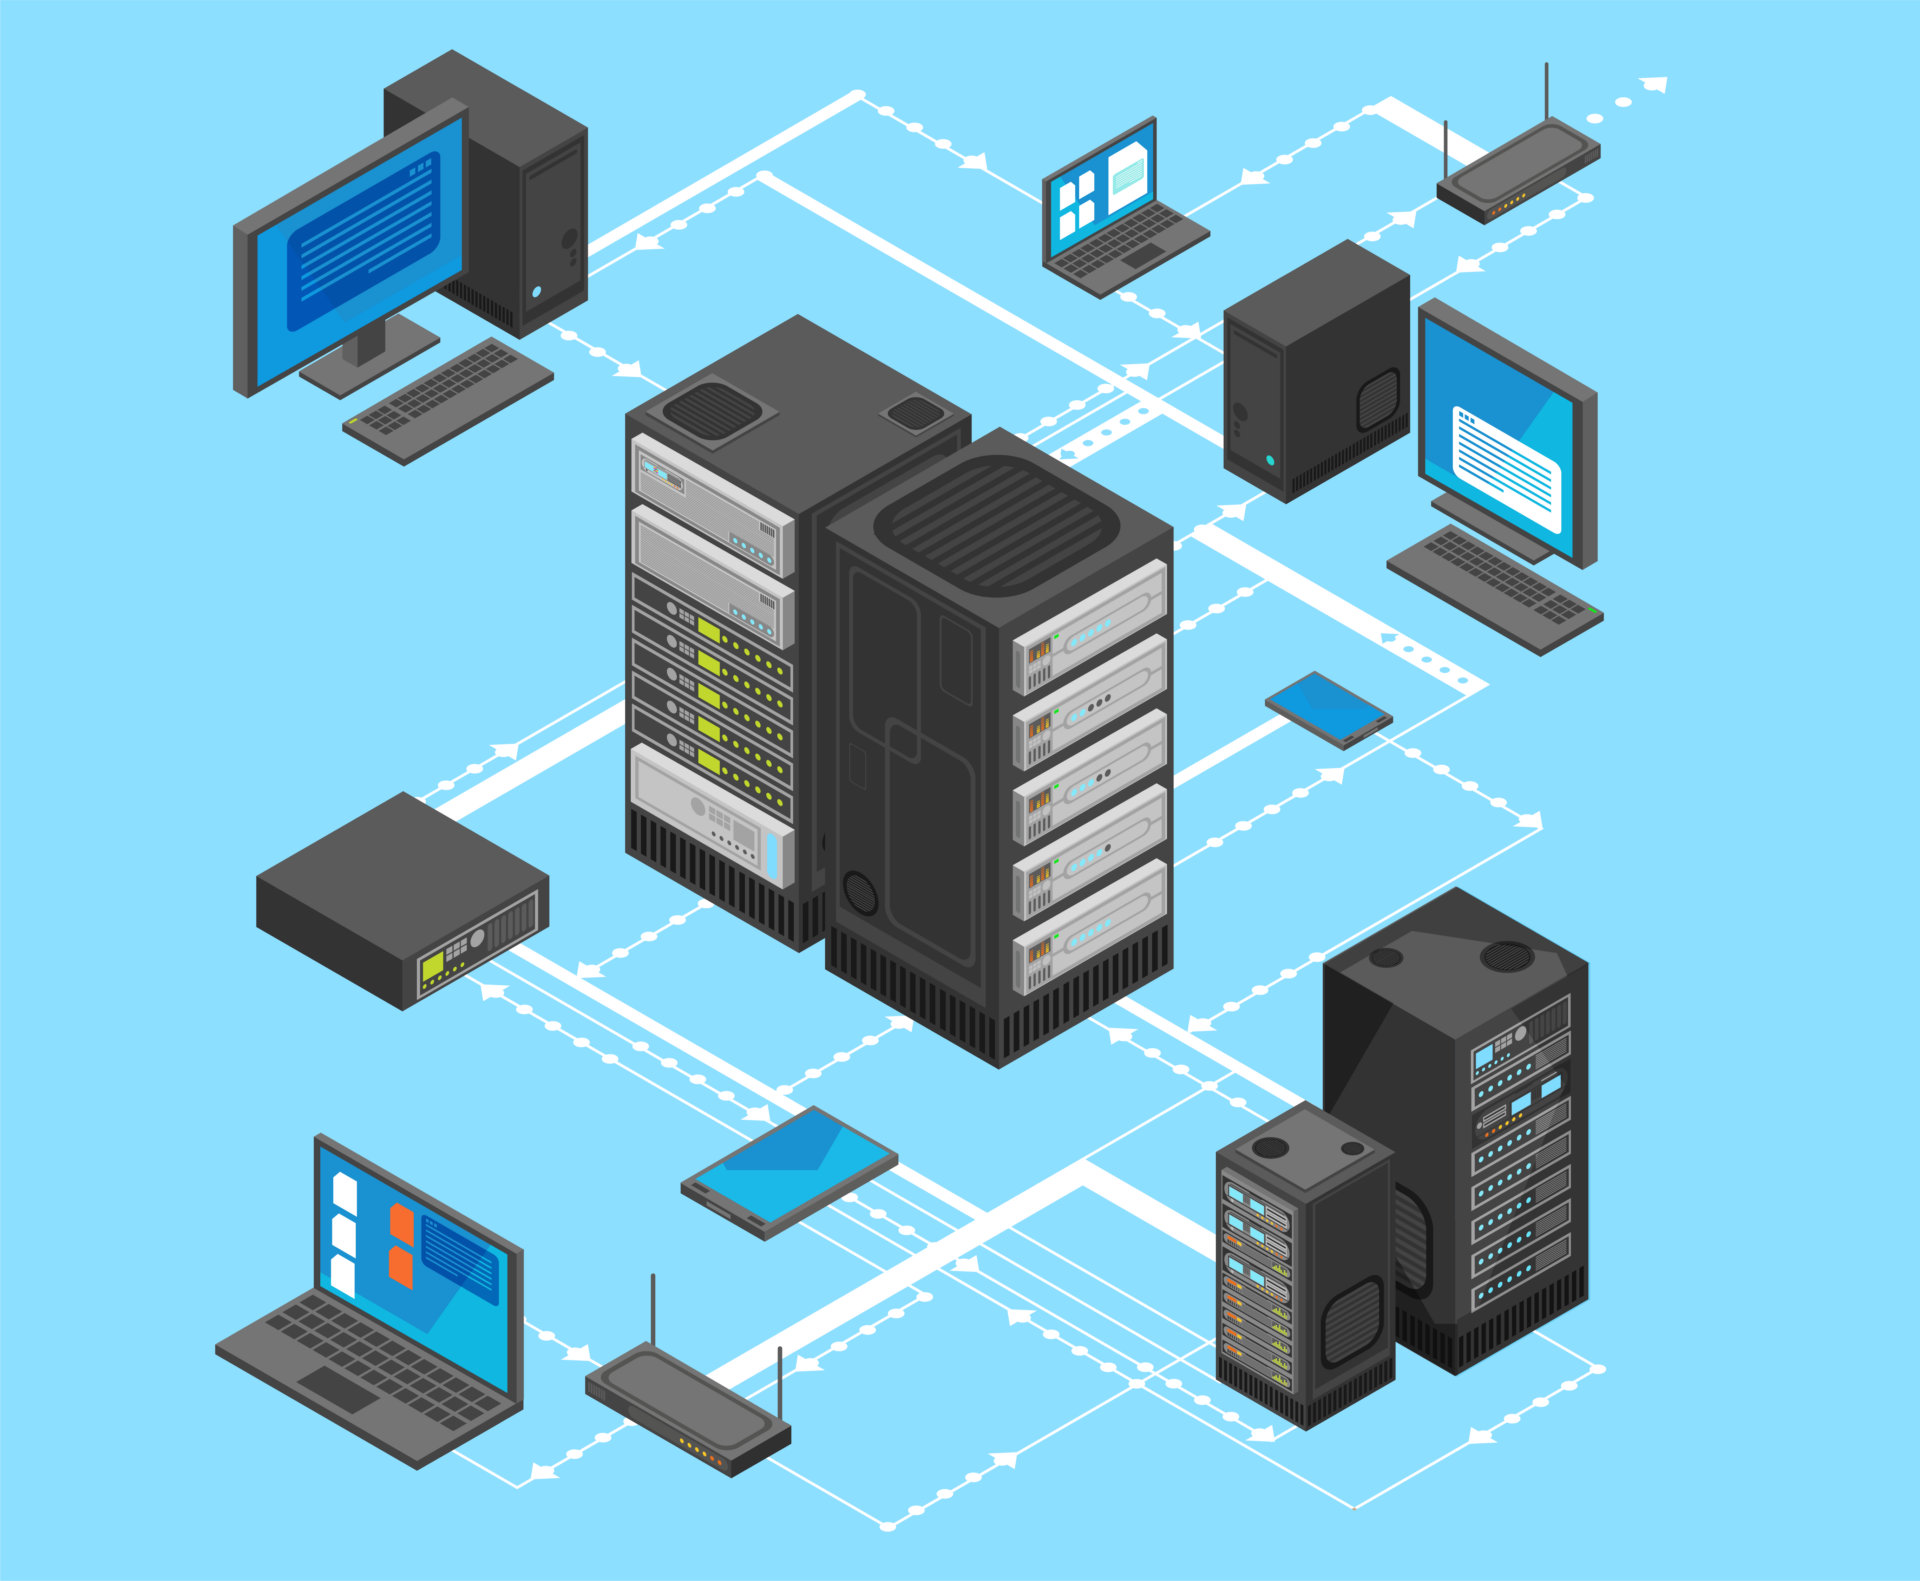 Computer network graphic portraying desktops and laptops connected to servers, ports, routers, etc.